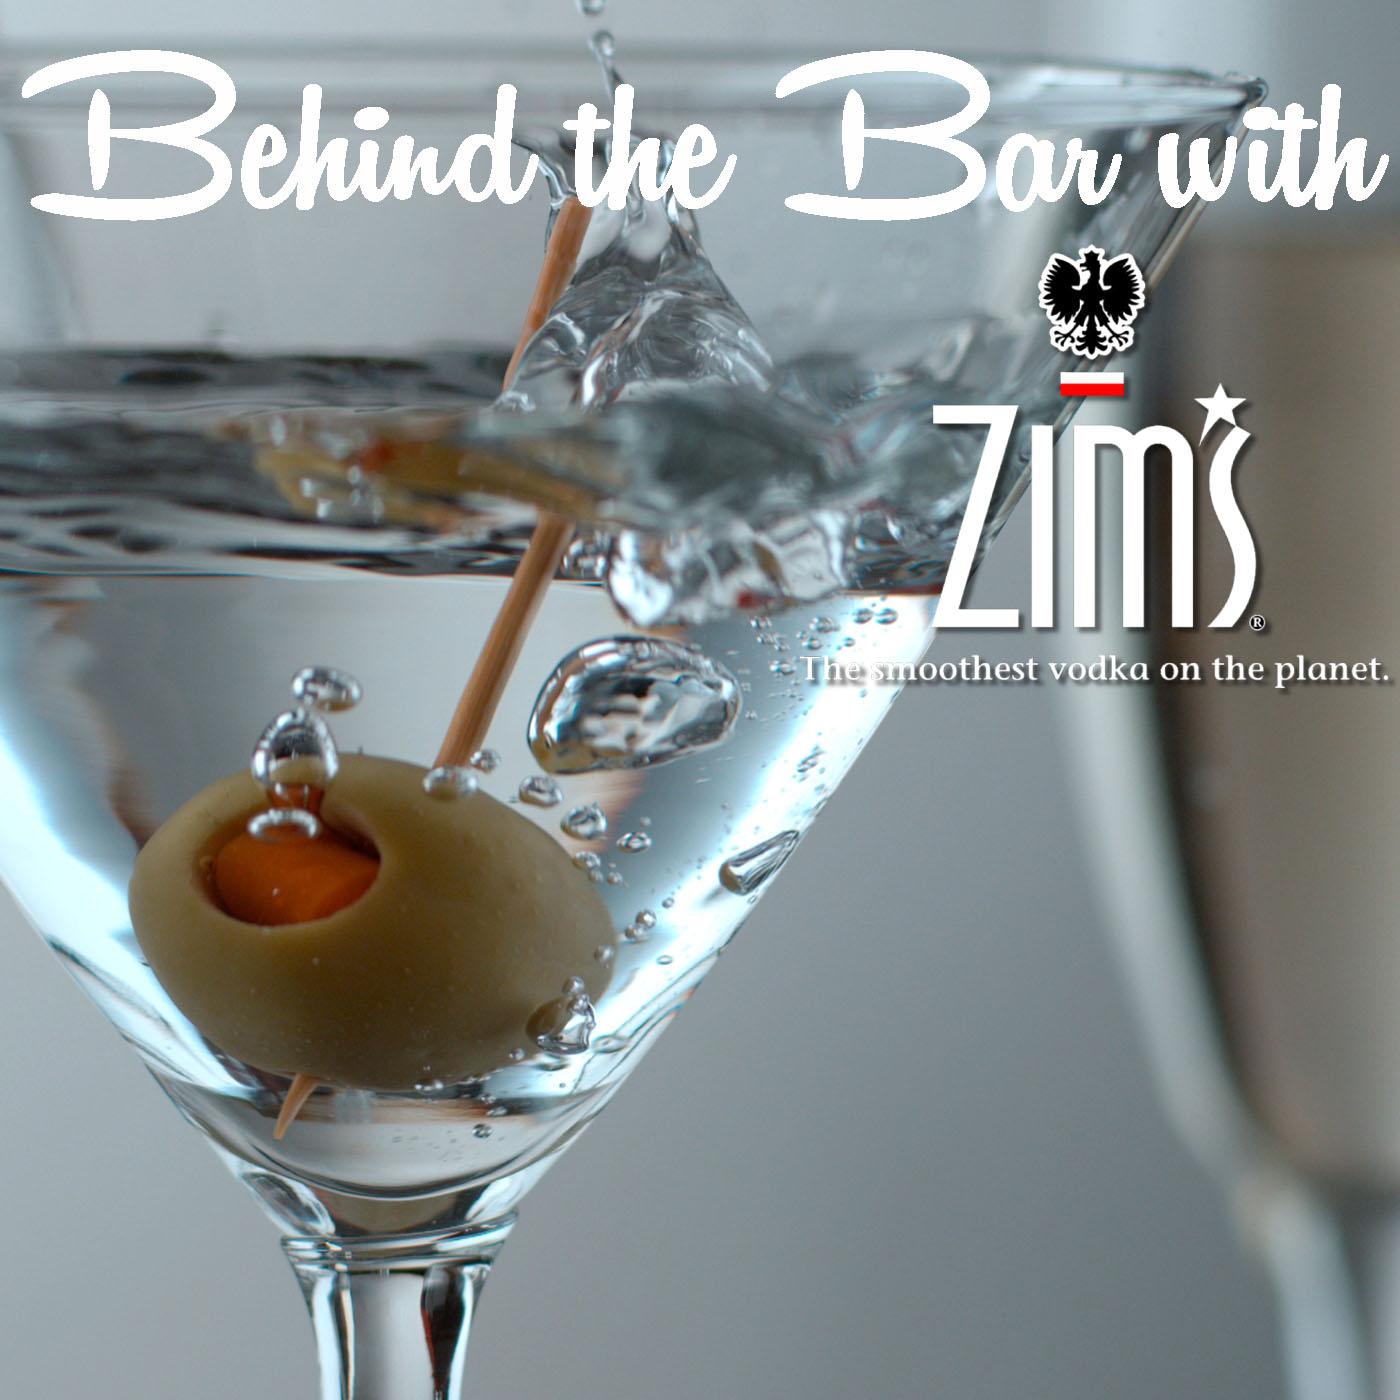 Behind The Bar With ZIM’S Vodka – Cadieux Cafe Detroit – John Rutherford – Episode 5